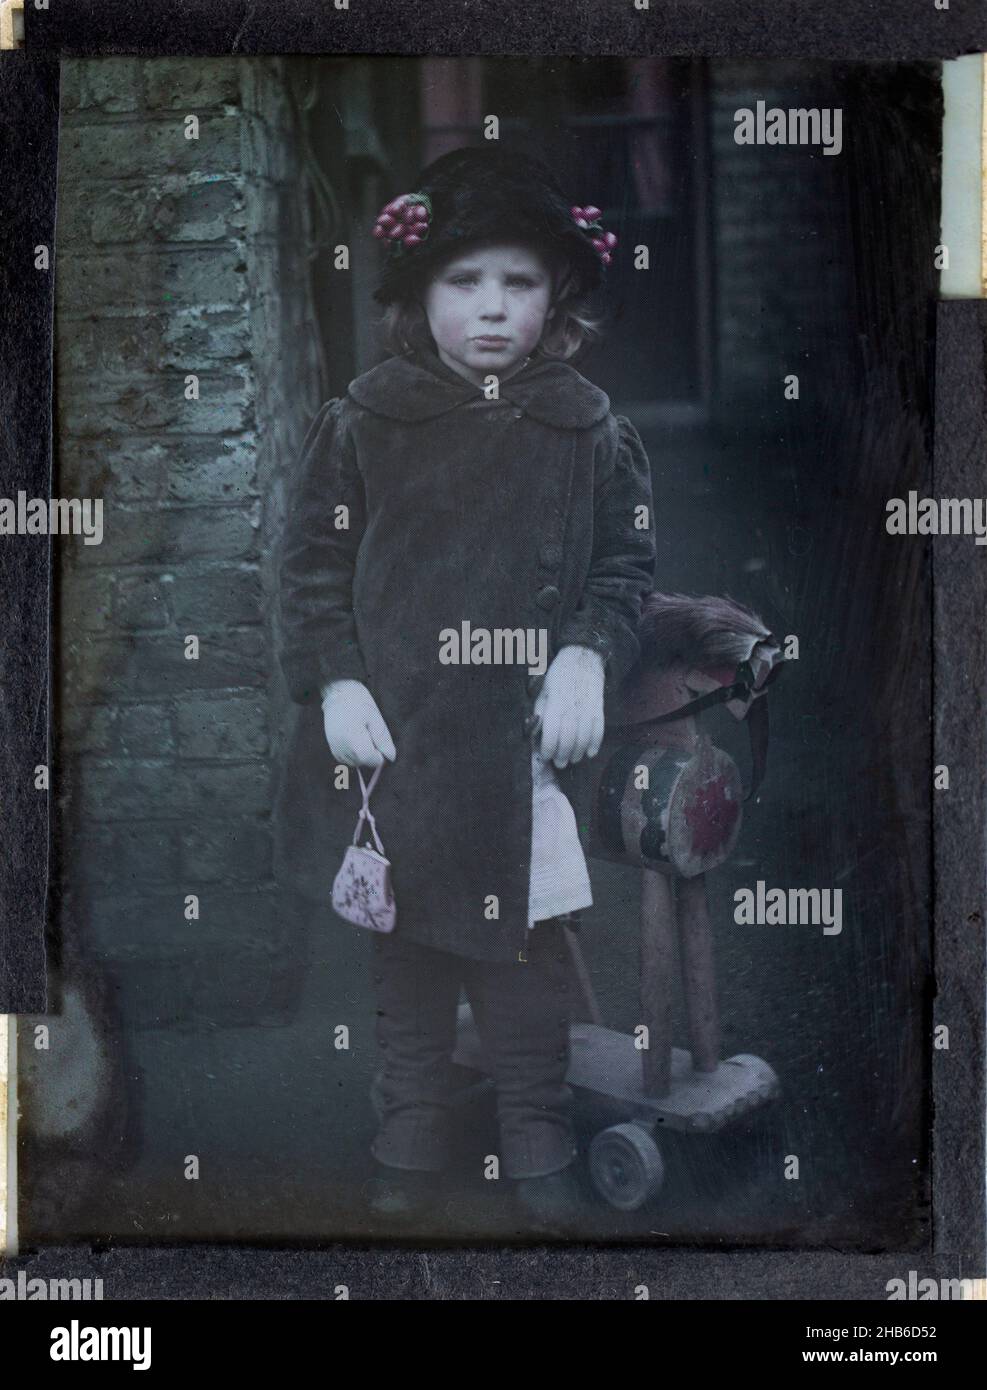 Paget process colourised magic lantern slide portrait of a young girl dressed up in adult clothing, circa 1900 Stock Photo